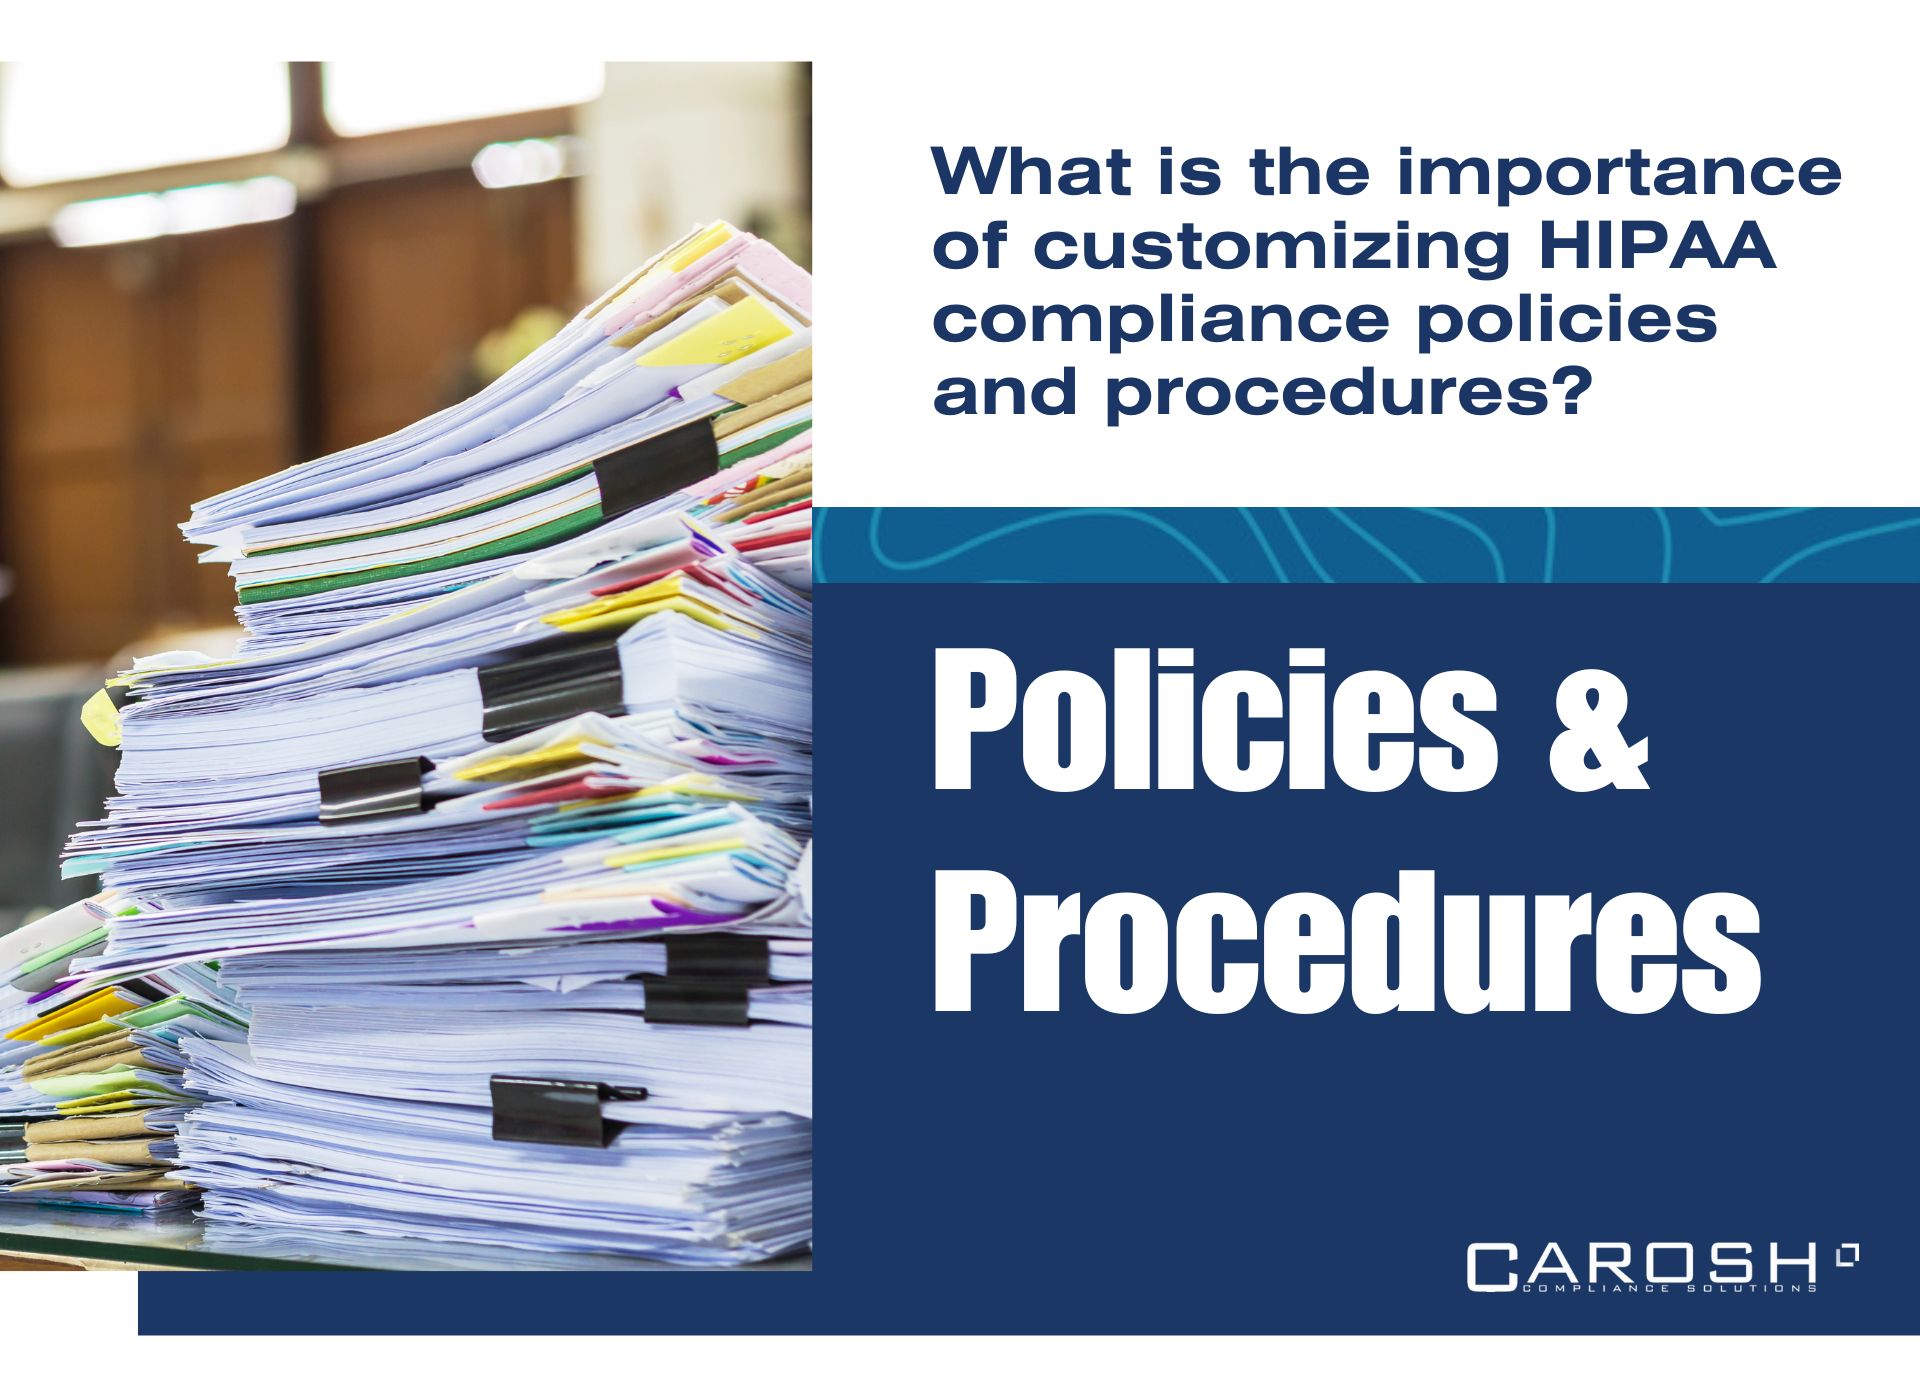 What is the importance of customizing HIPAA compliance policies and procedures?